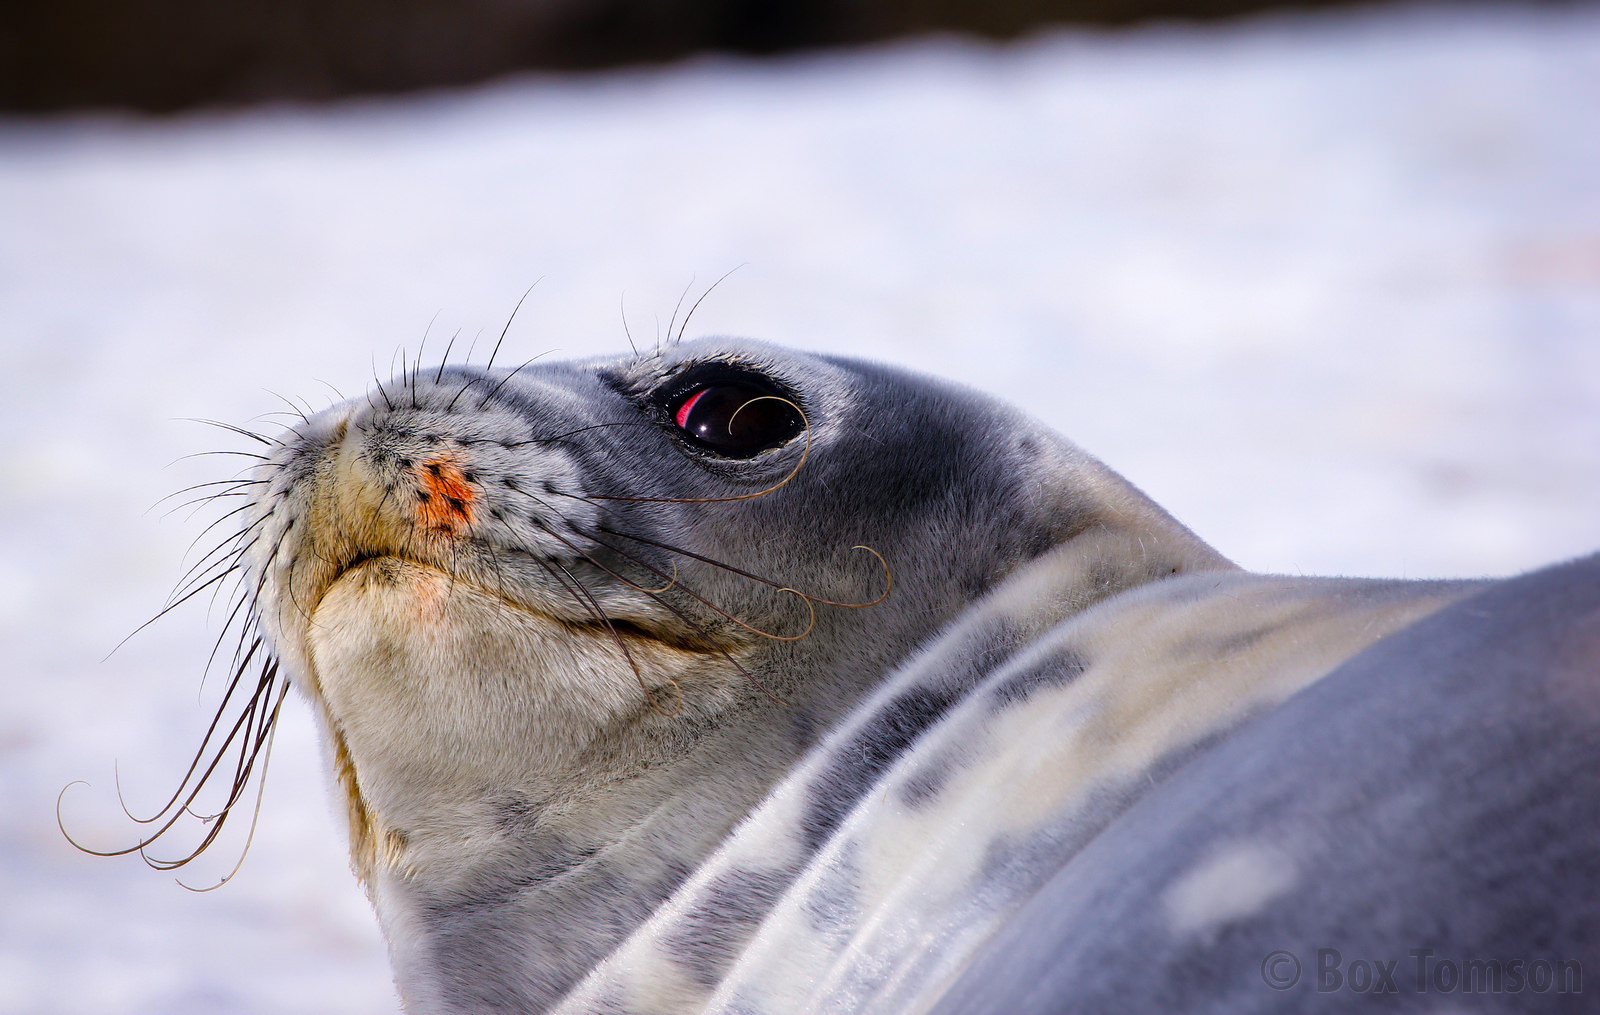 A seal turned to look at the camera, with very prominent whiskers (sensors)